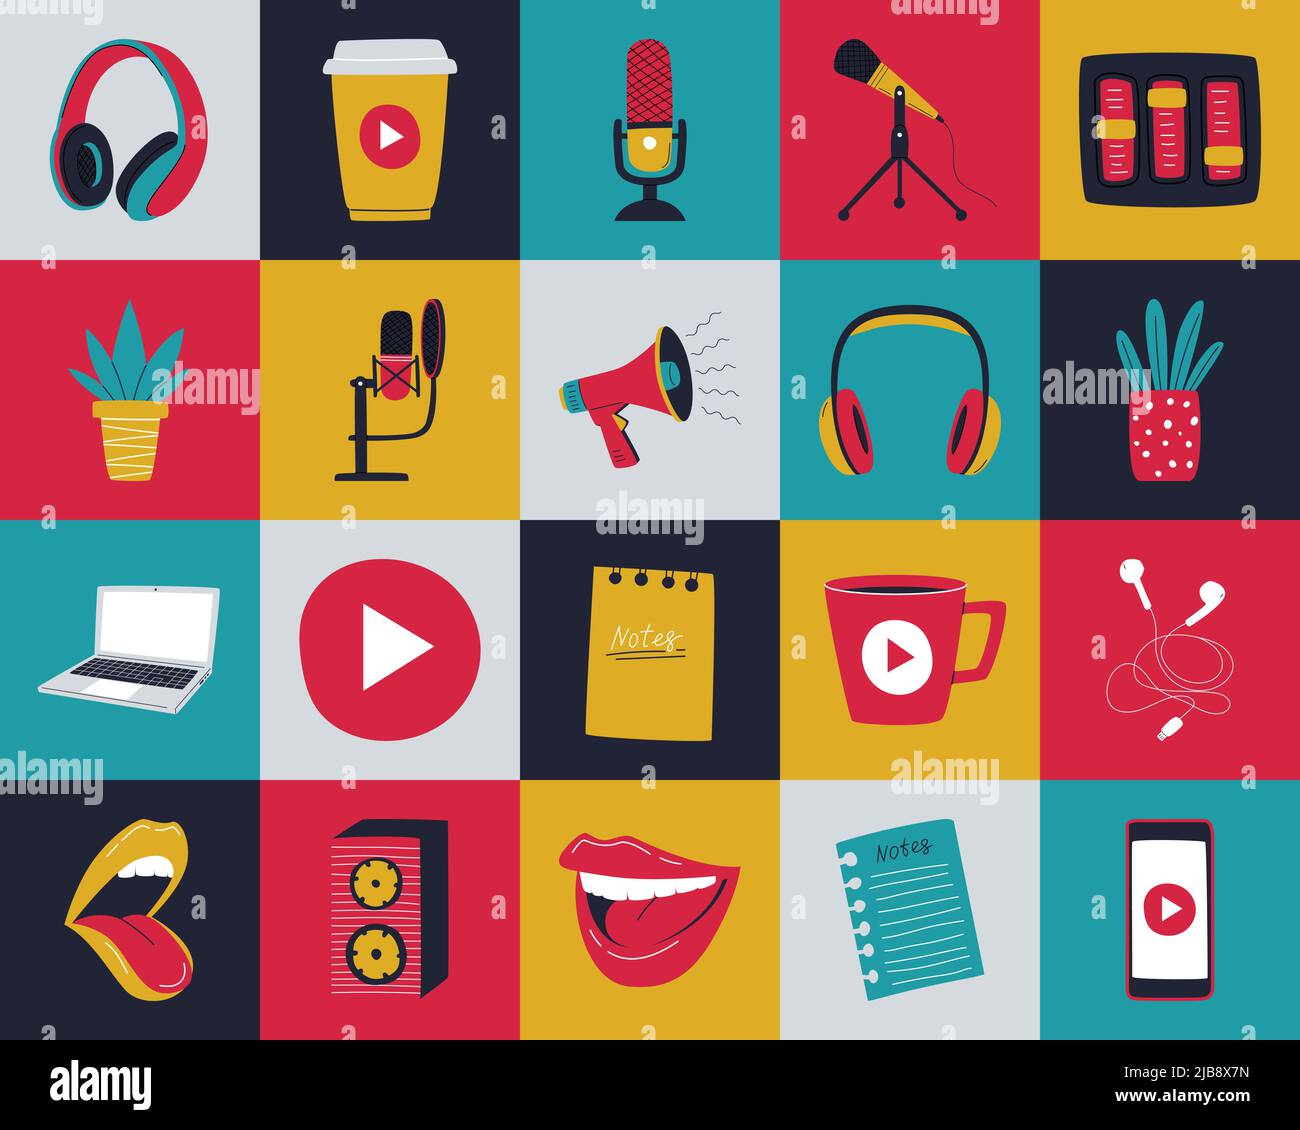 Set of icons, symbols of an online podcast, radio show, broadcast. Microphones, laptop, megaphone, talking mouth. Can be used as a seamless pattern. C Stock Vector